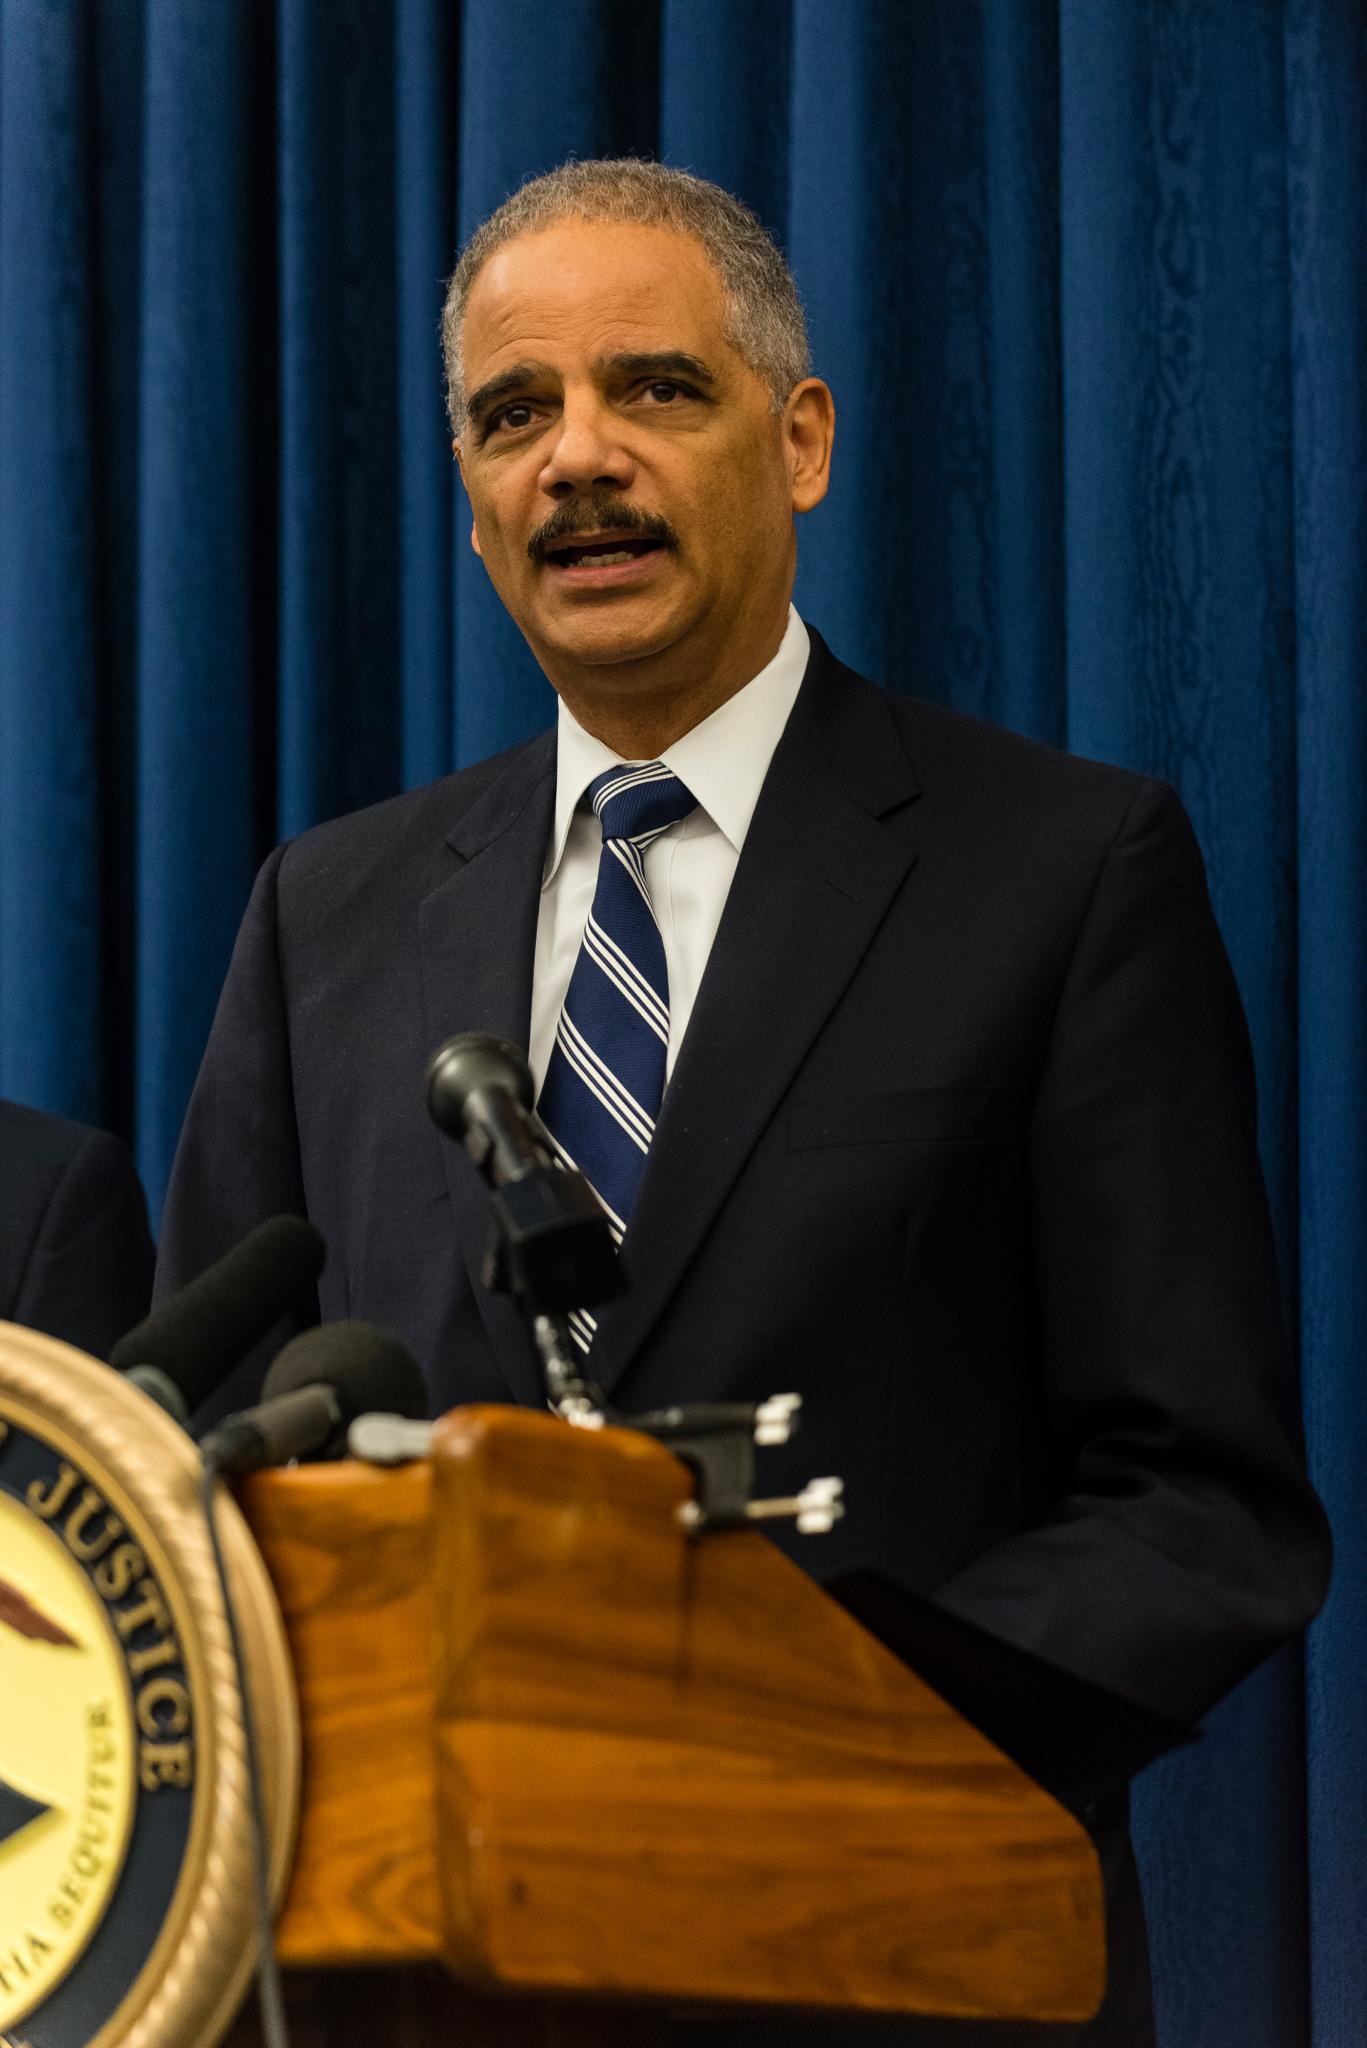 Eric Holder Revises Famous Michelle Obama Quote: 'When They Go Low, We Kick Them'